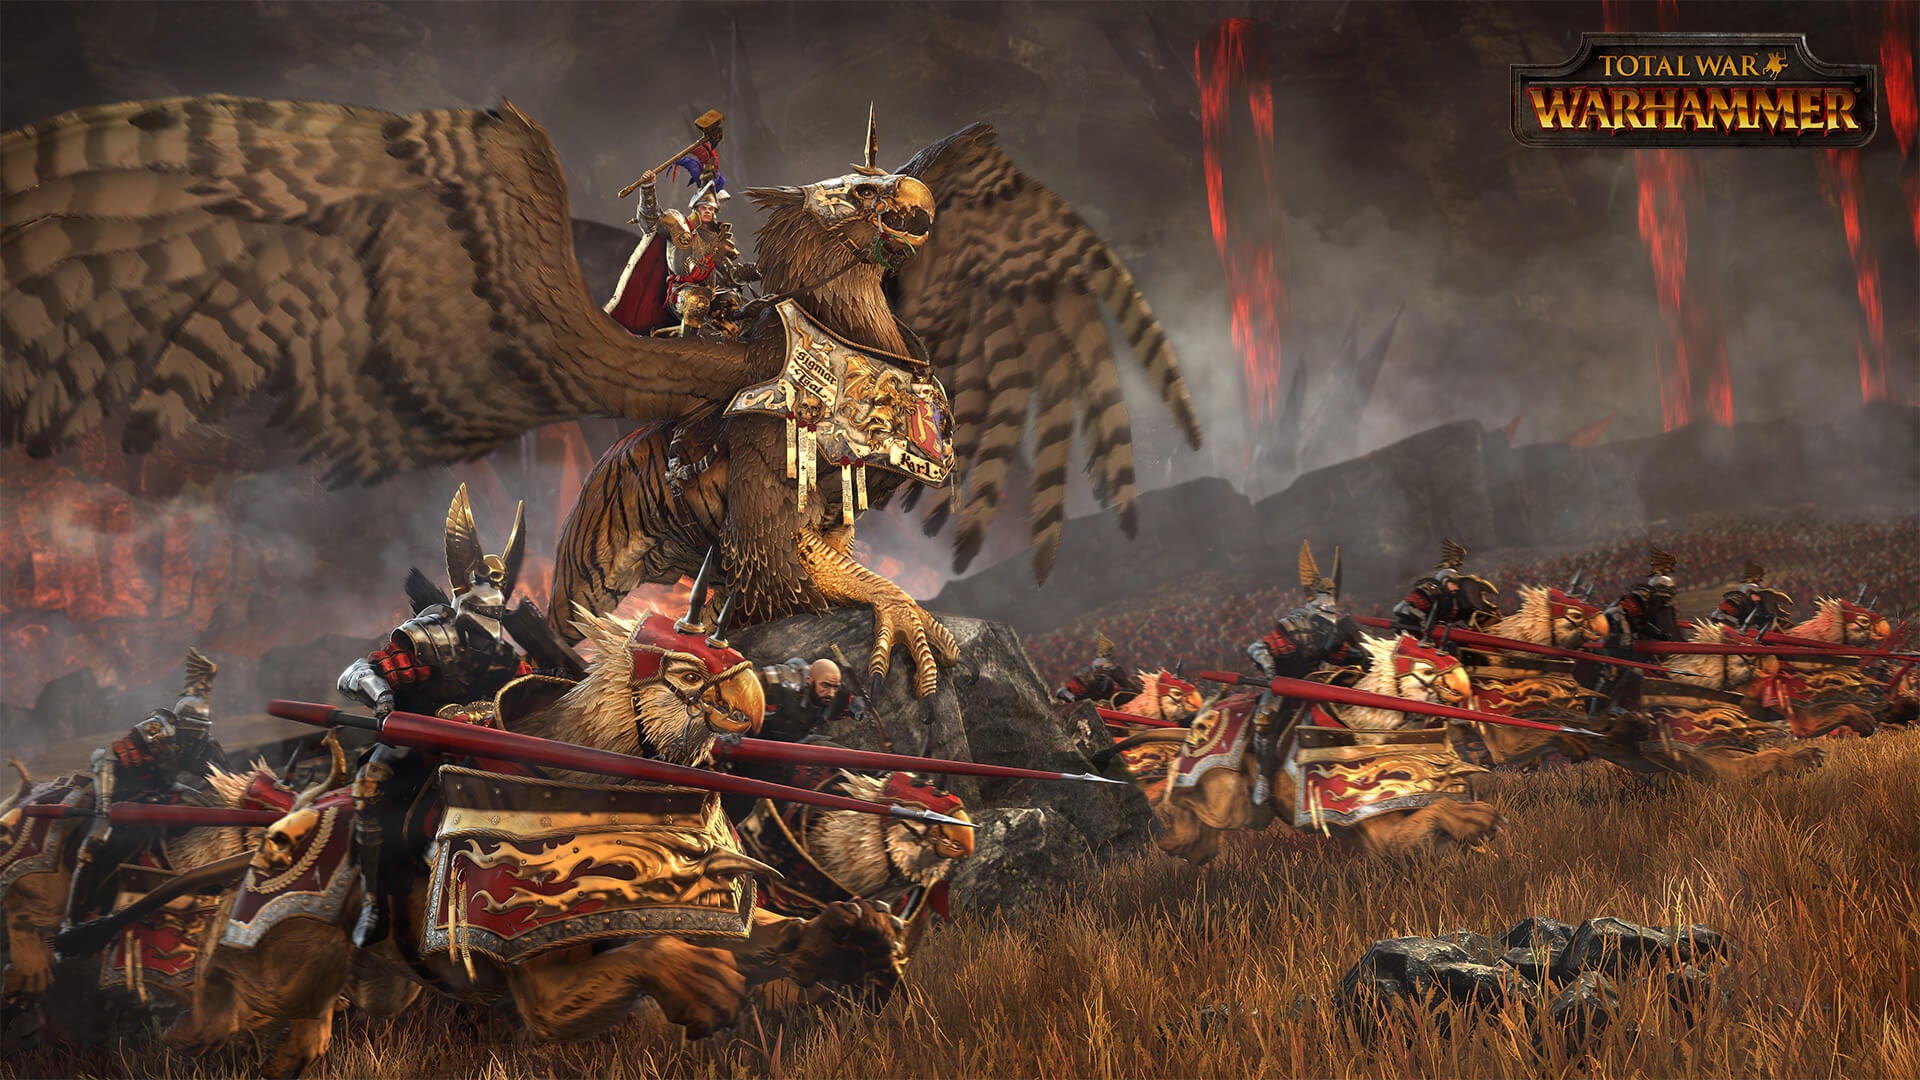 Image for Total War: Warhammer is free this week on the Epic Games Store